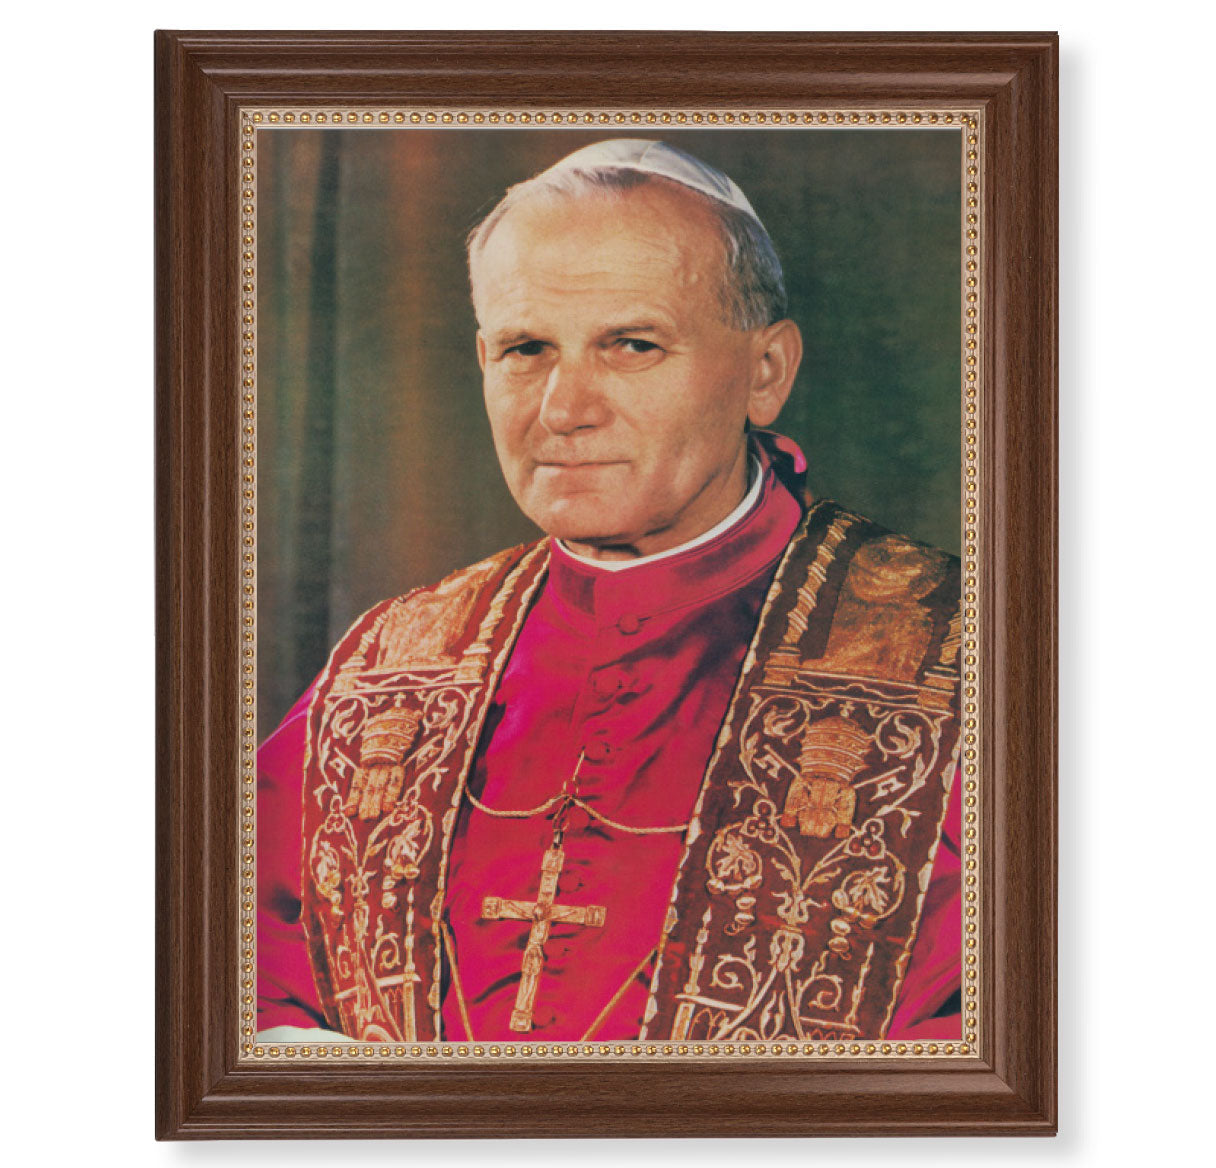 St. John Paul II Picture Framed Wall Art Decor Extra Large, Classic Dark Walnut Finished Frame with Gold Beaded Lip